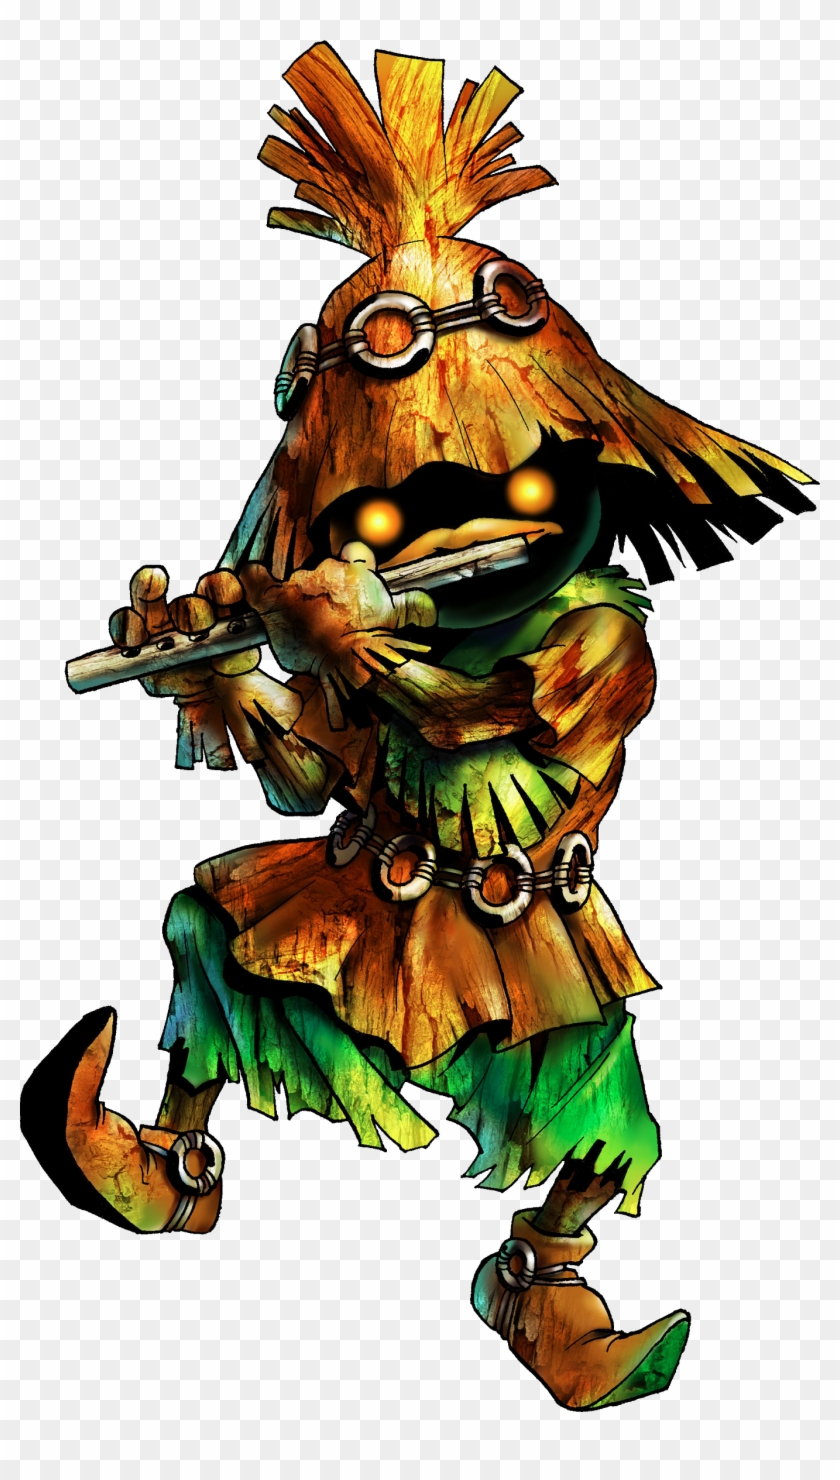 What Exactly Is Skull Kid Wearing I Know It's Some - Zelda Skull Kid Clipart